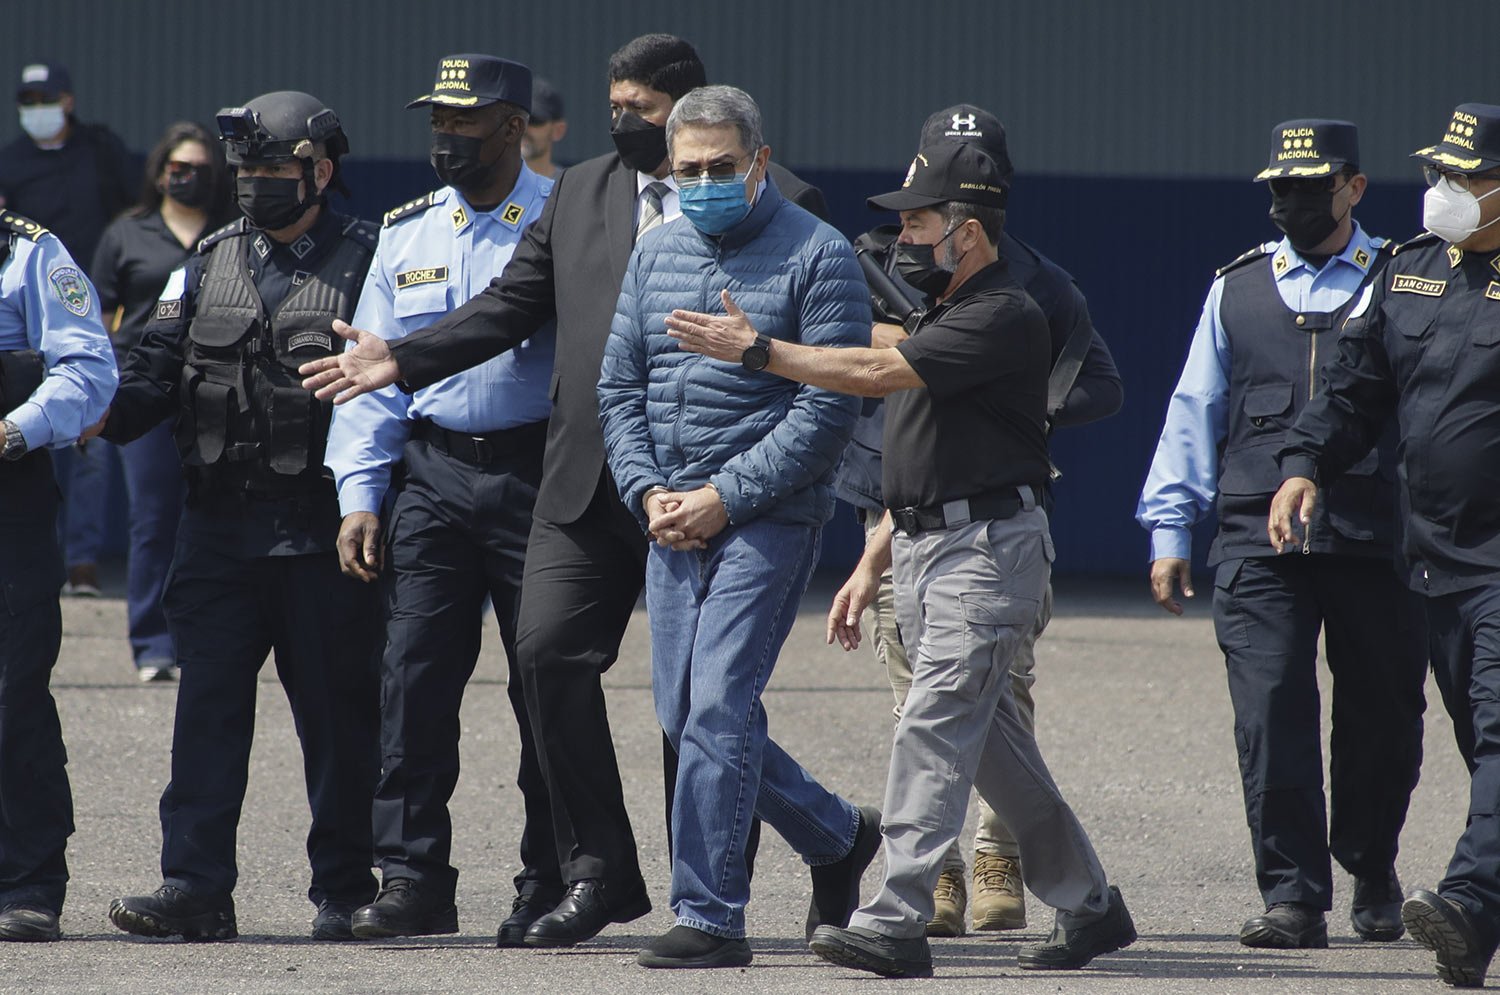  Former Honduran President Juan Orlando Hernandez is taken in handcuffs to an aircraft as he is extradited to the U.S. where he faces drug trafficking and weapons charges, at an Air Force base in Tegucigalpa, Honduras, April 21, 2022. (AP Photo/Elmer